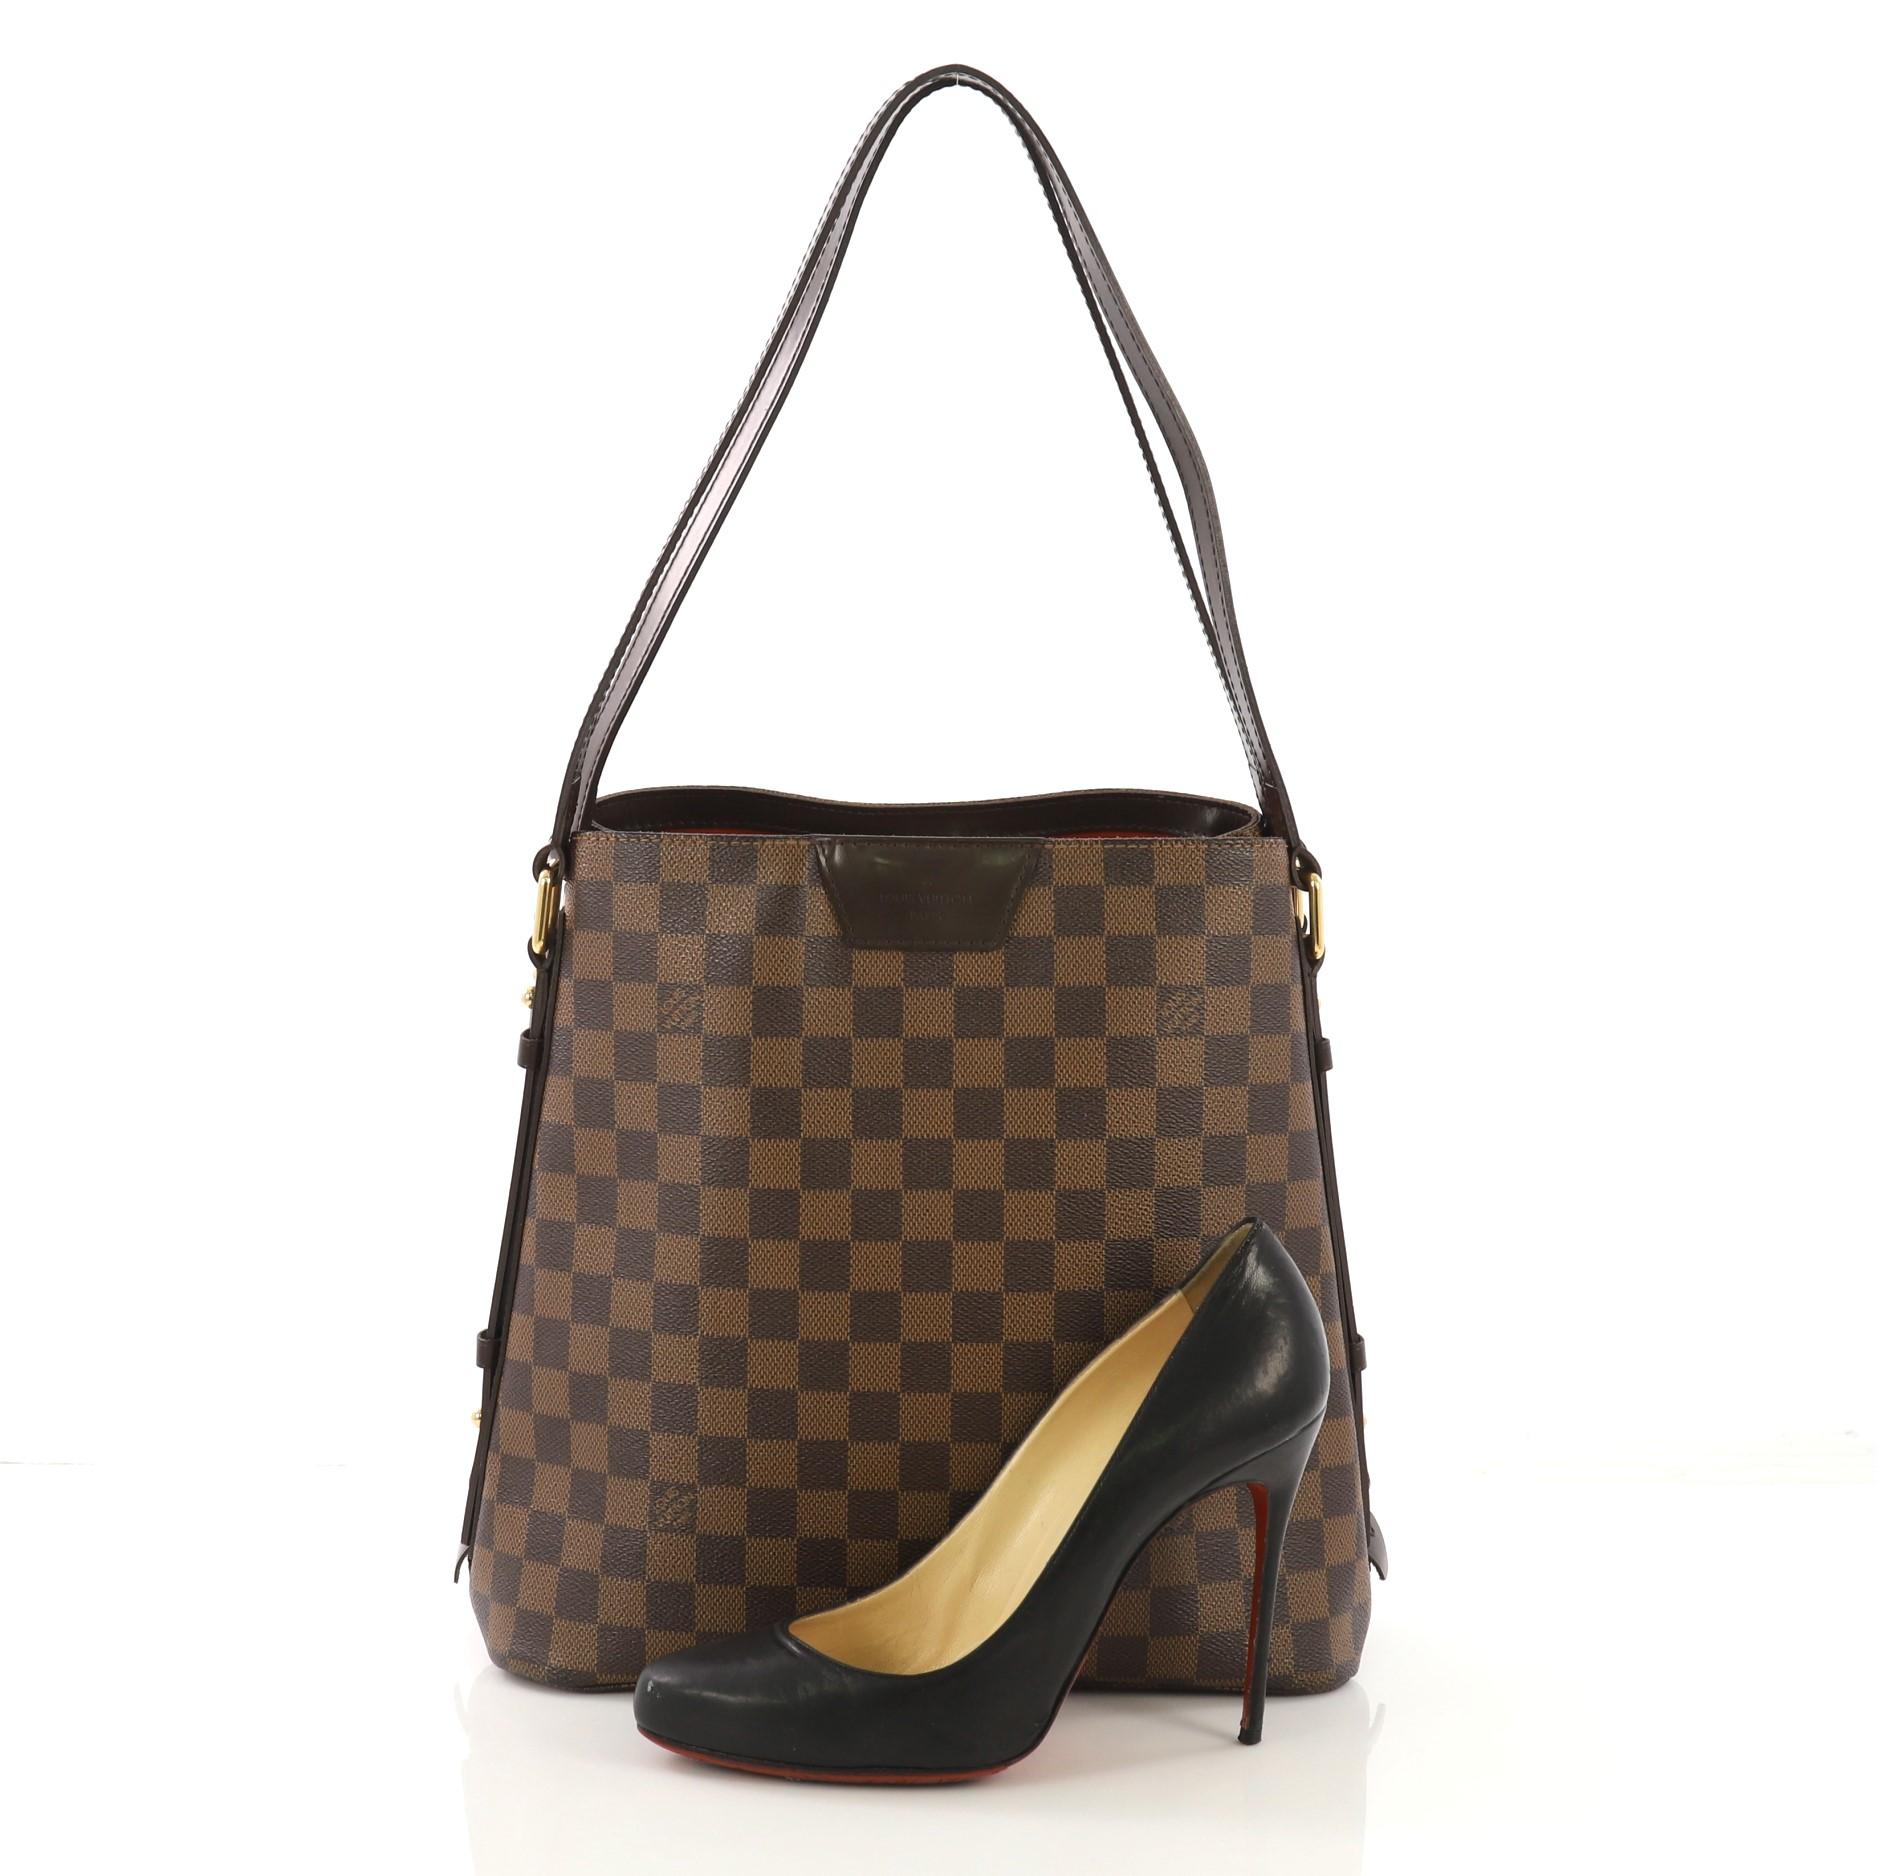 This Louis Vuitton Cabas Rivington Damier, Crafted from damier ebene coated canvas, features dual flat leather handles, two side zippers to expand, and gold-tone hardware. Its clasp hook closure opens to a red fabric interior with zip pocket.